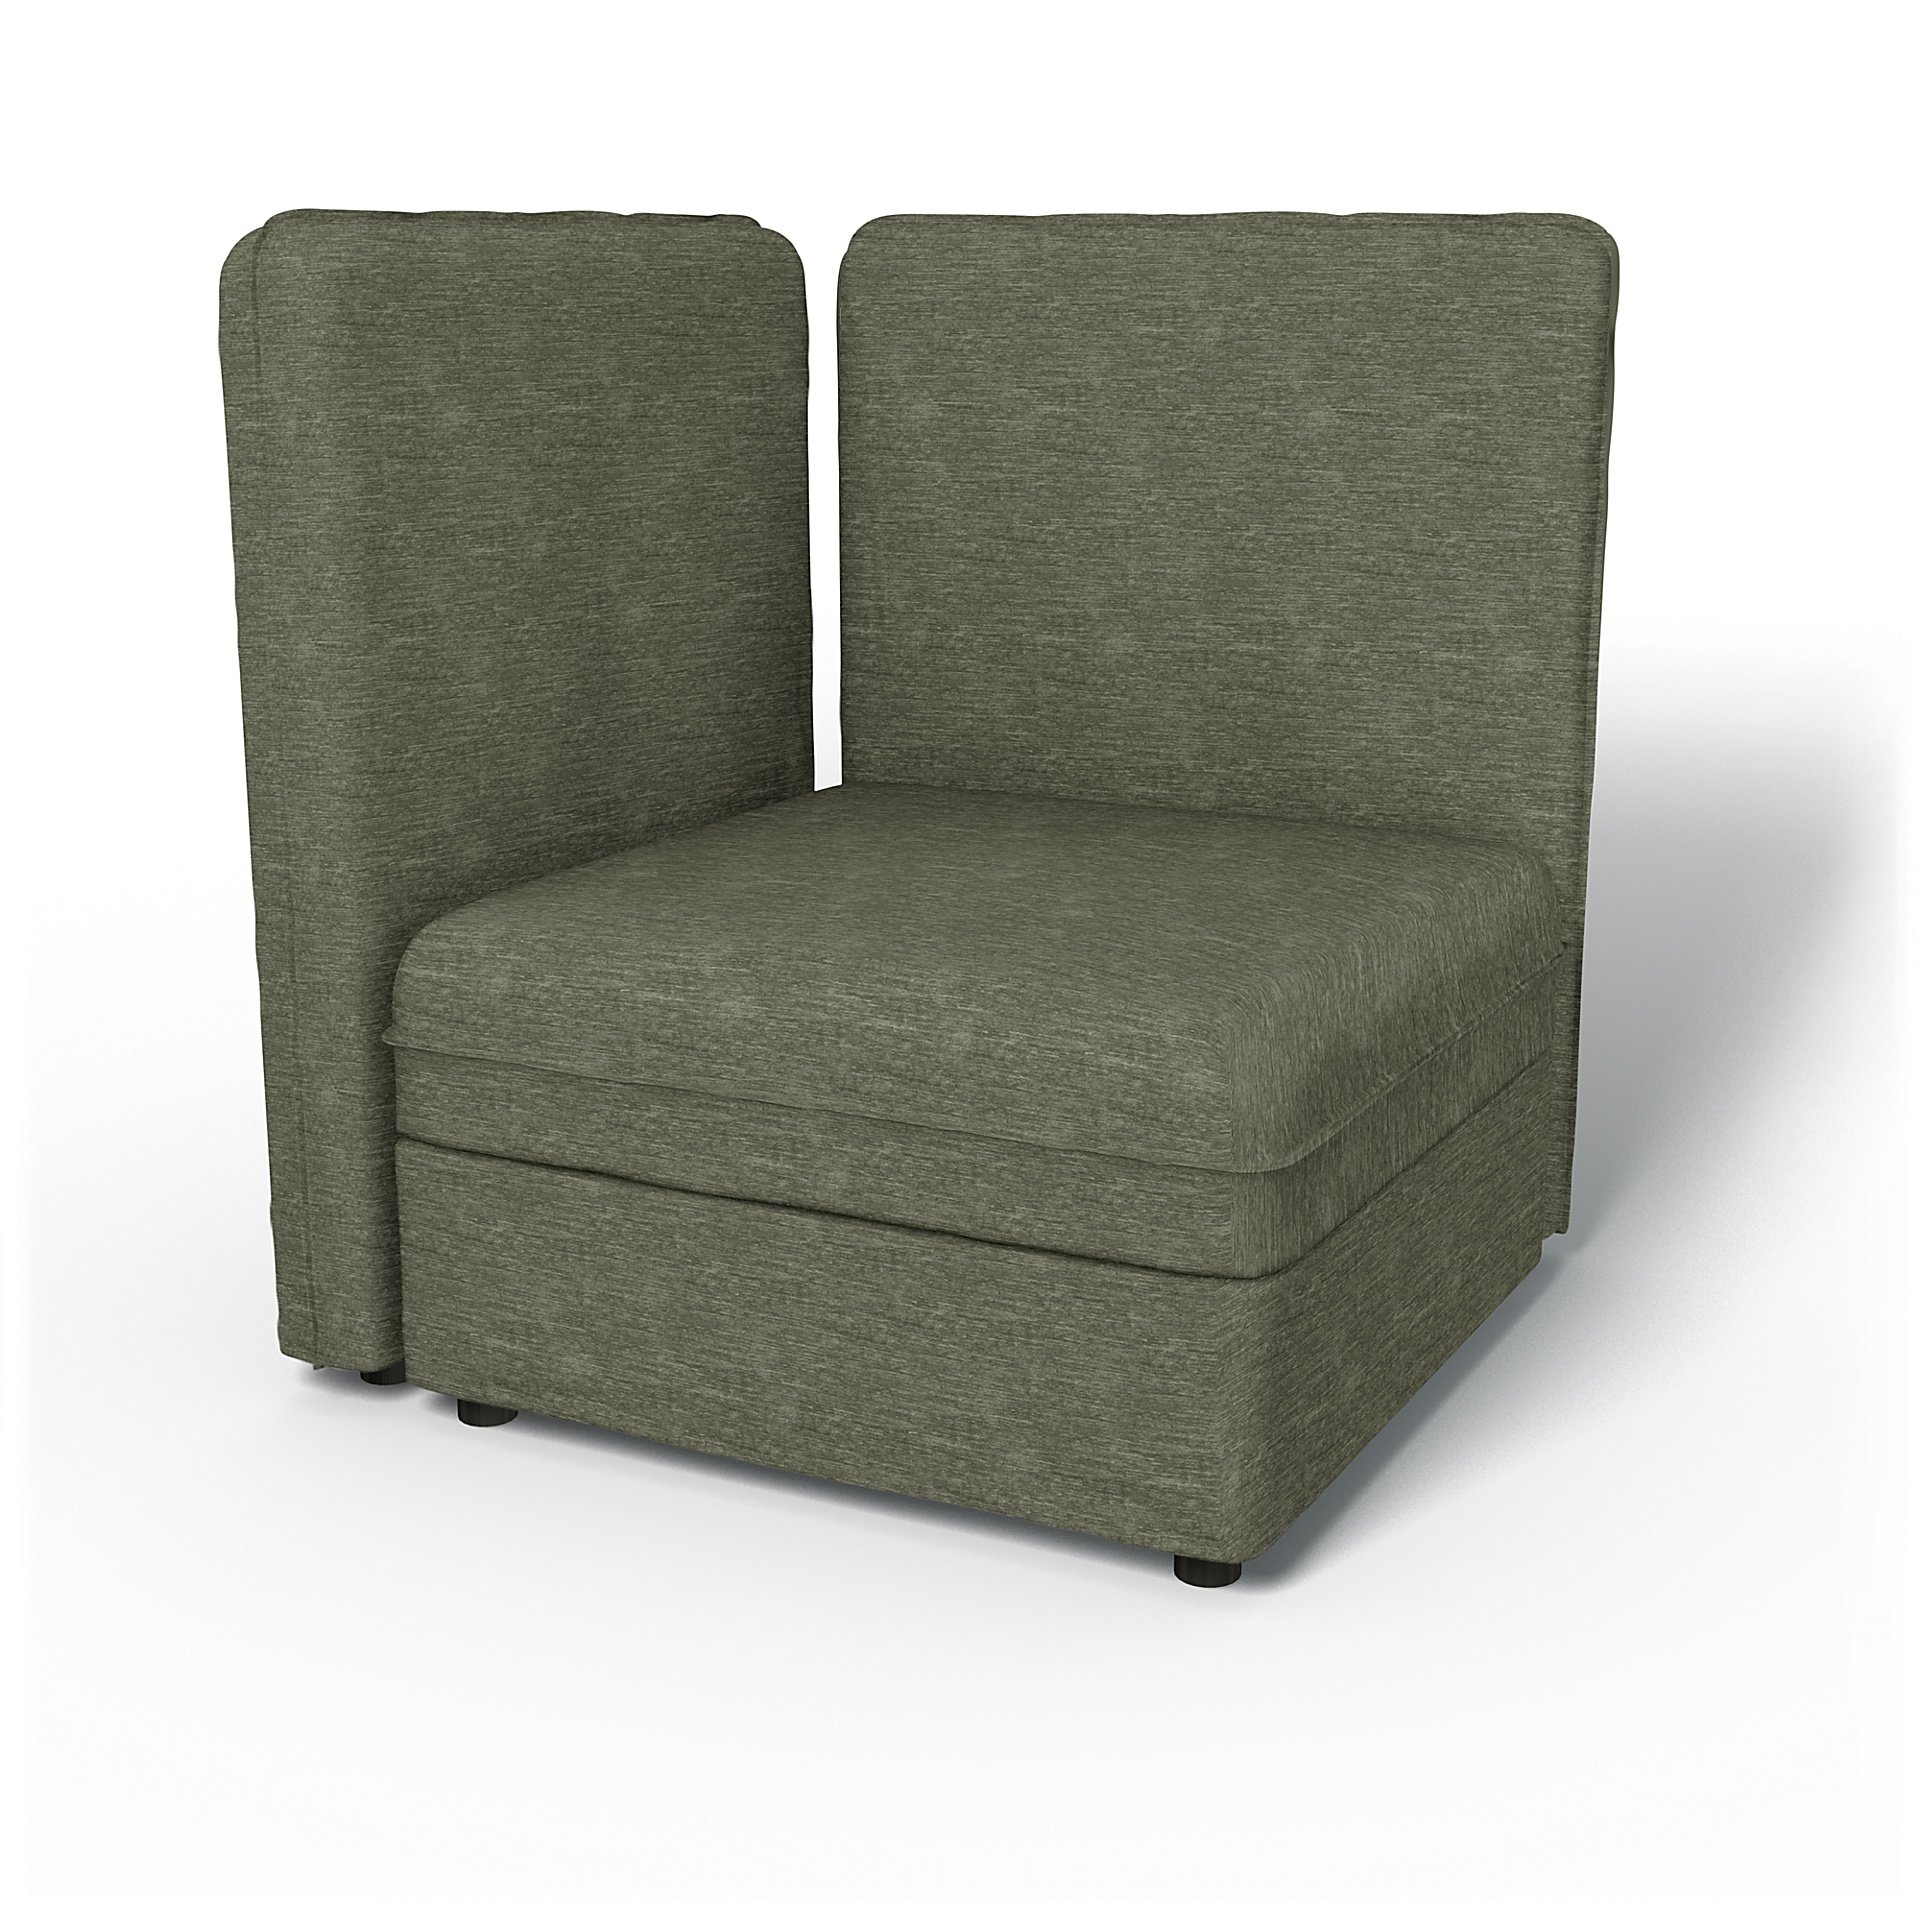 IKEA - Vallentuna Corner Seat Module with High Back and Storage Cover 80x80 32x32in, Green Grey, Vel